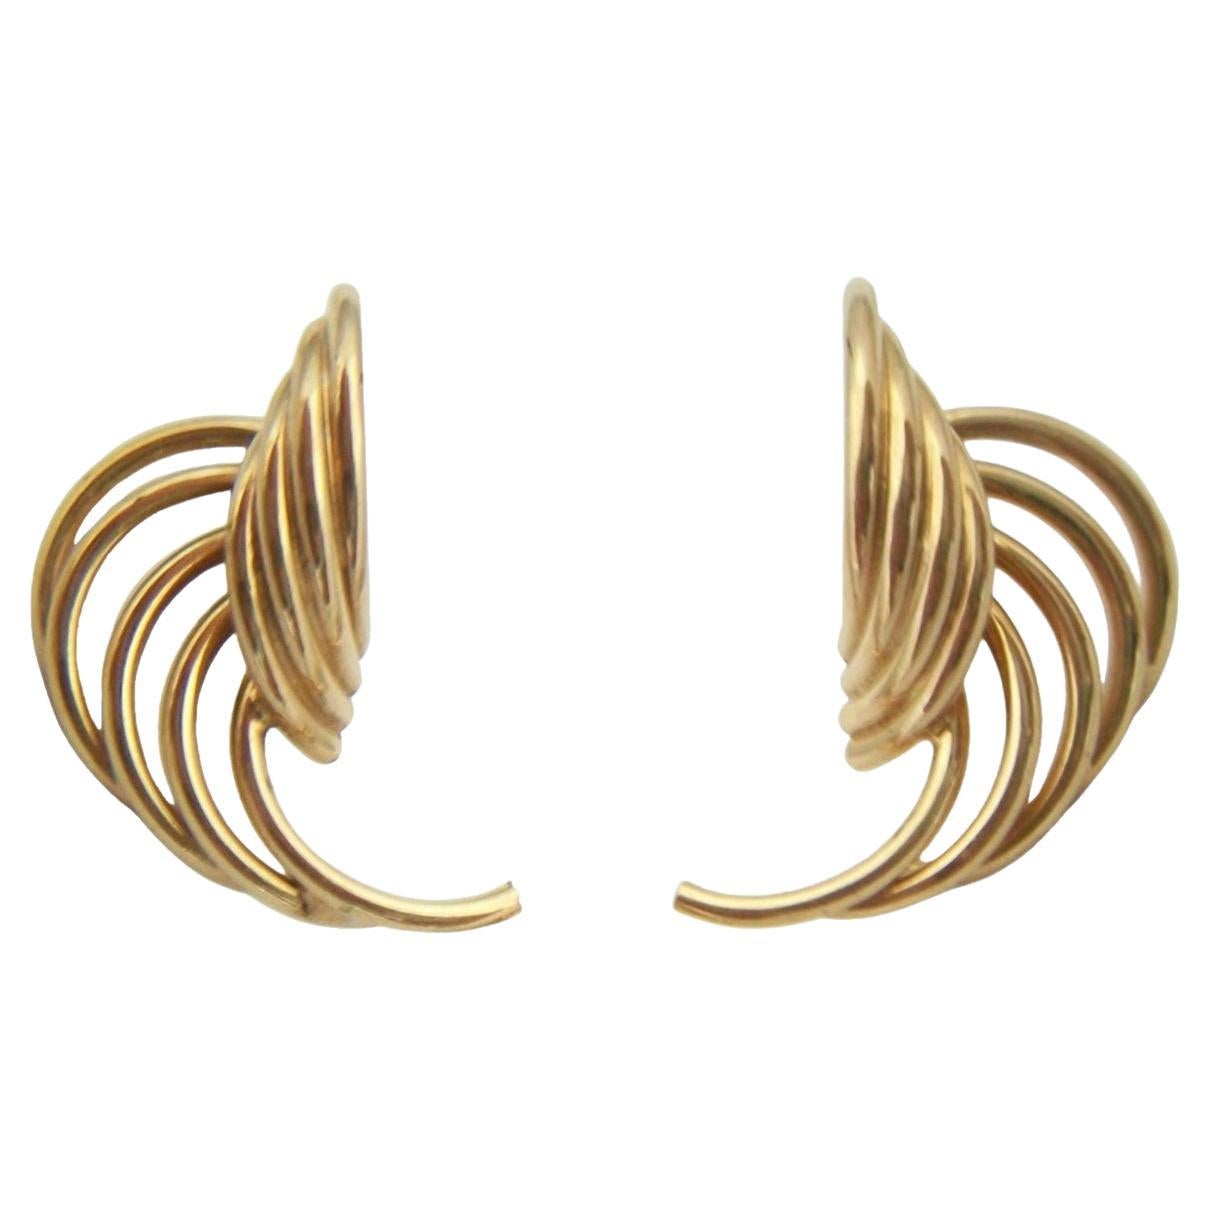 Vintage Pair of 10K Yellow Gold Earrings - U.S. - Circa 1990's For Sale